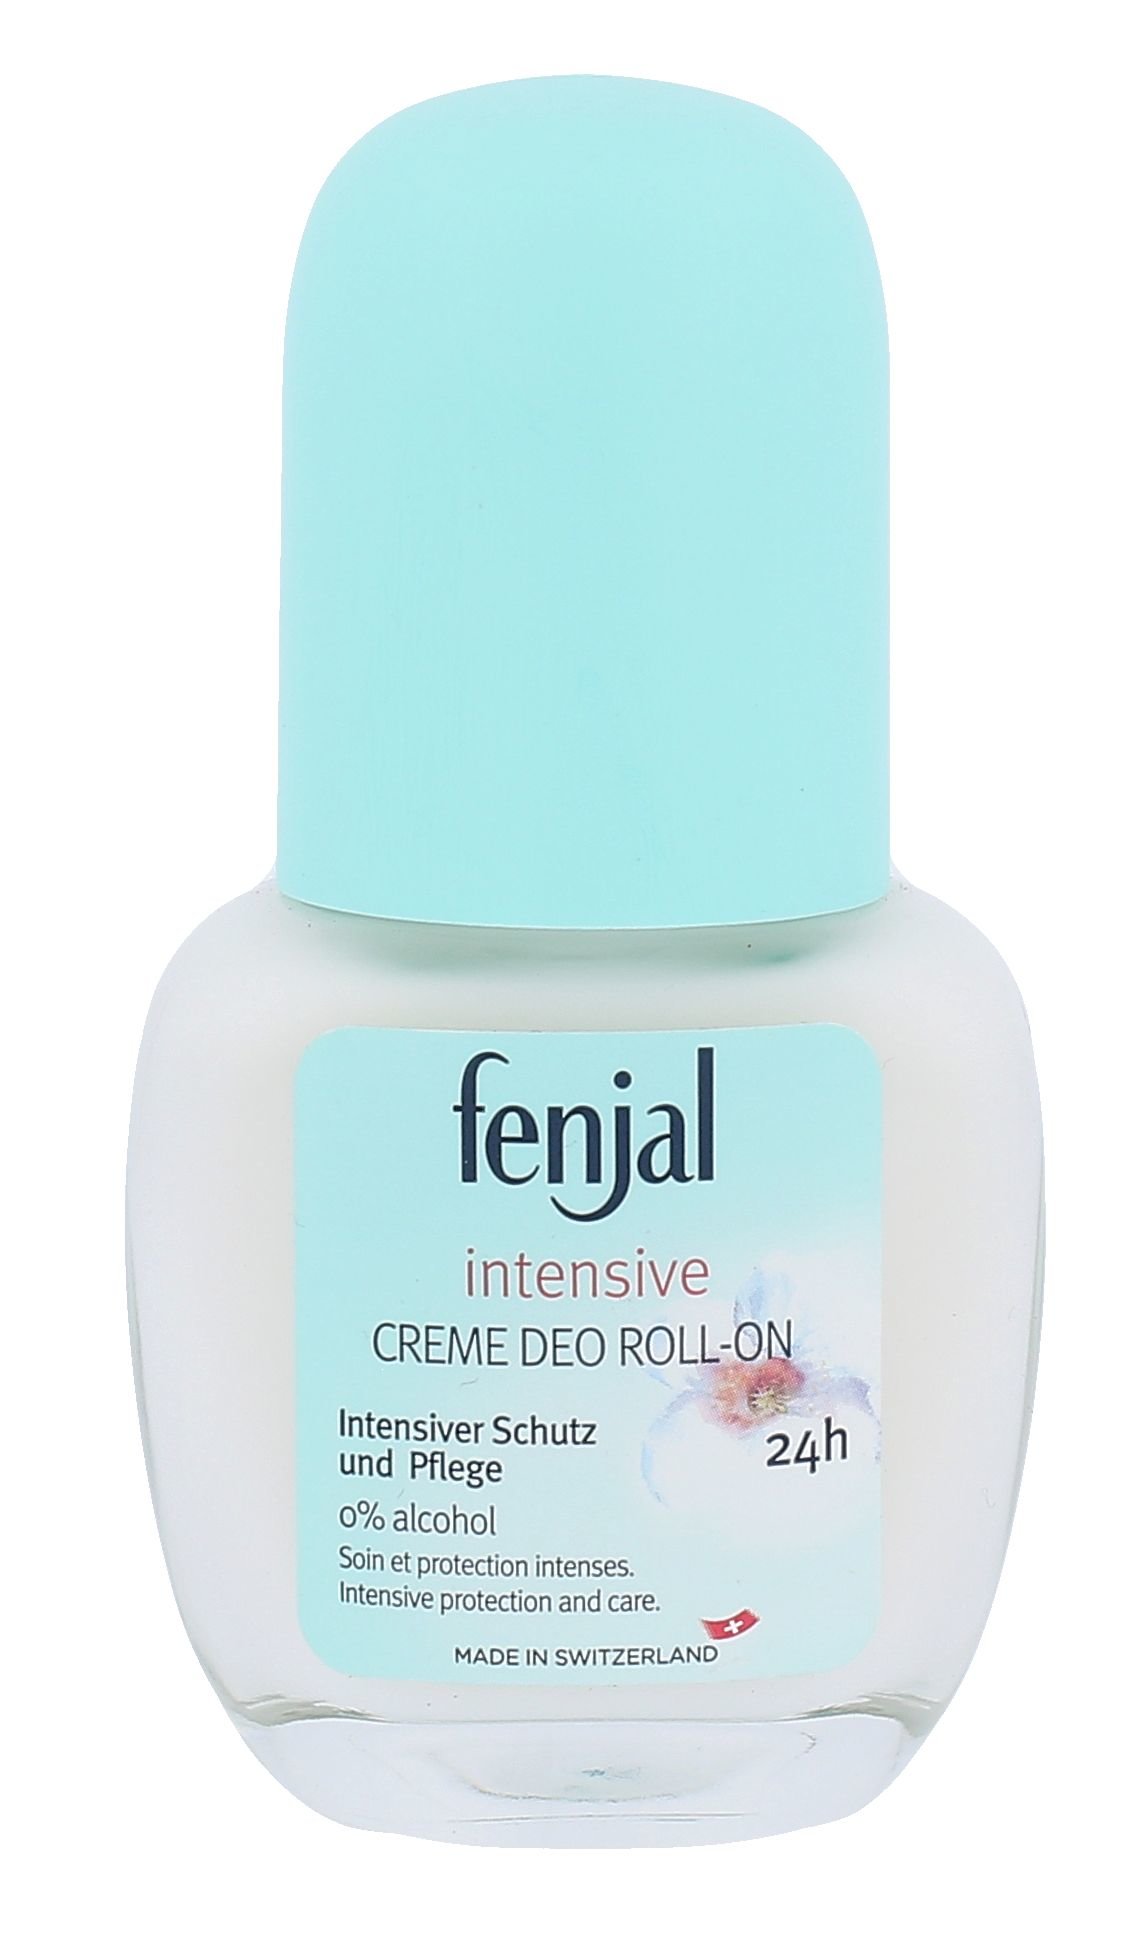 Fenjal Intensive Creme Deo Roll-On 24H